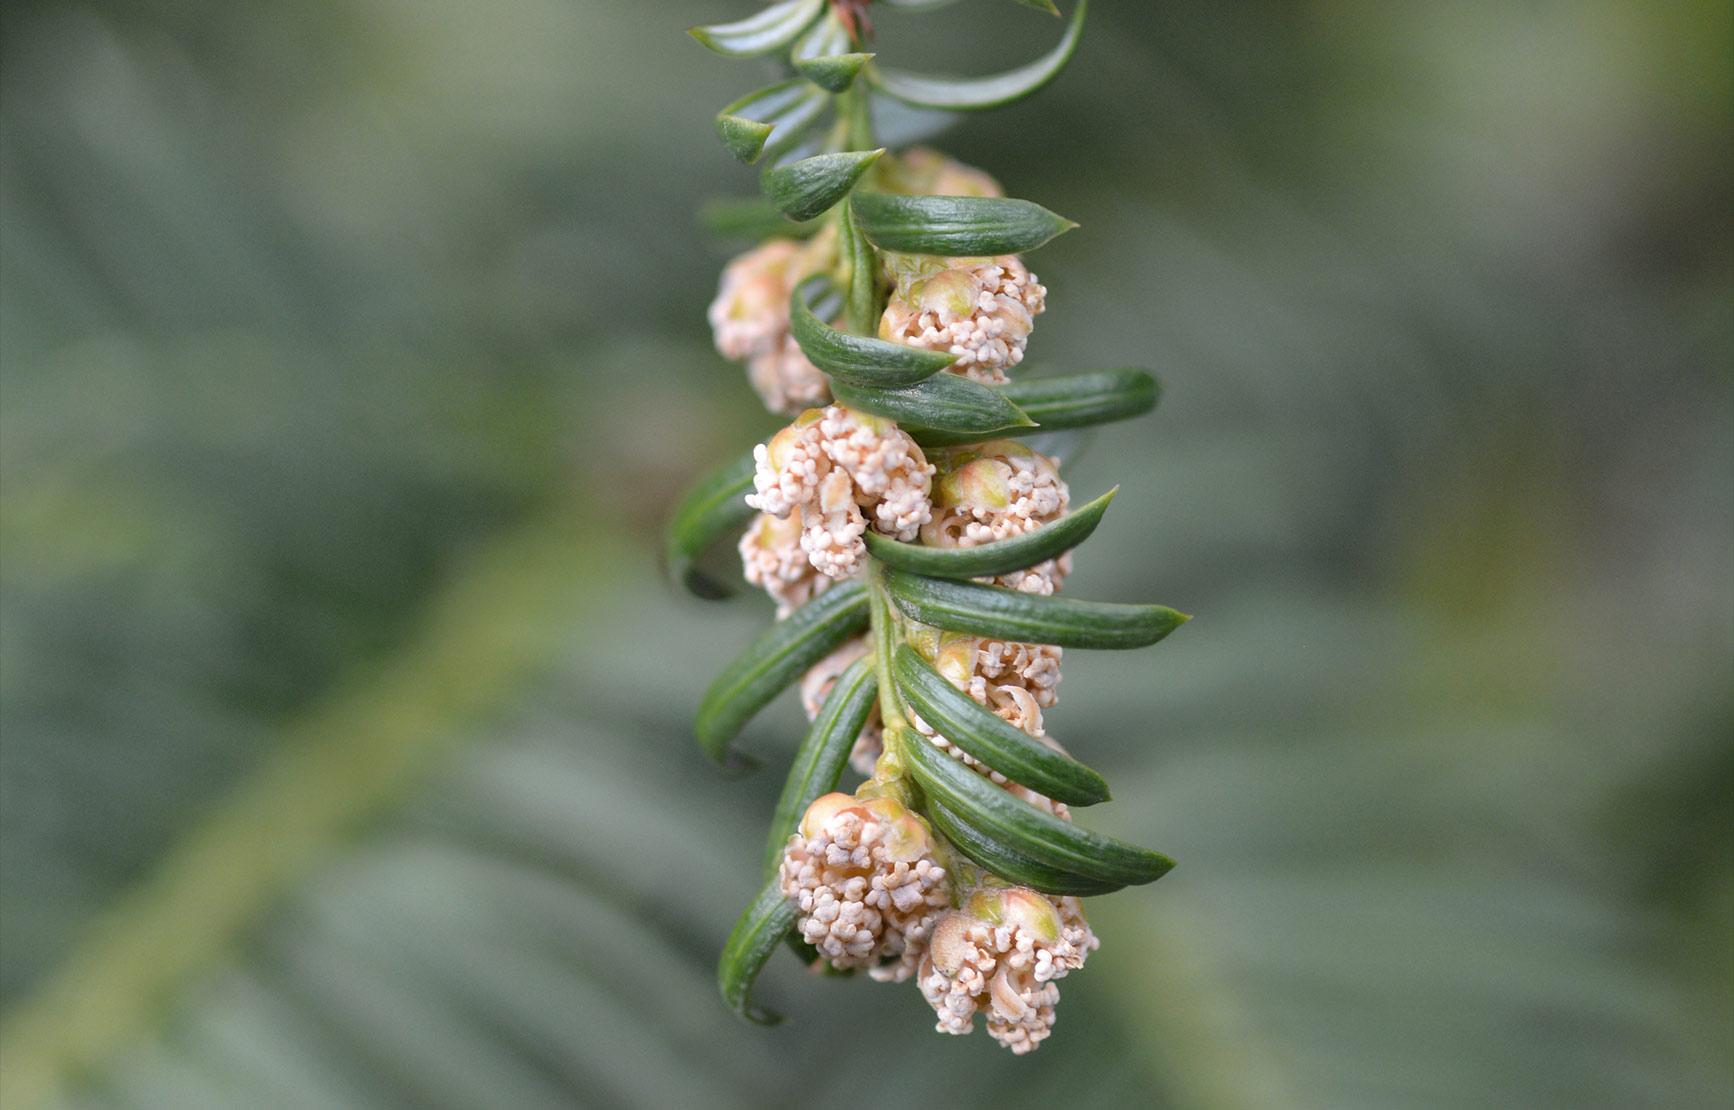 The flower of a yew tree.